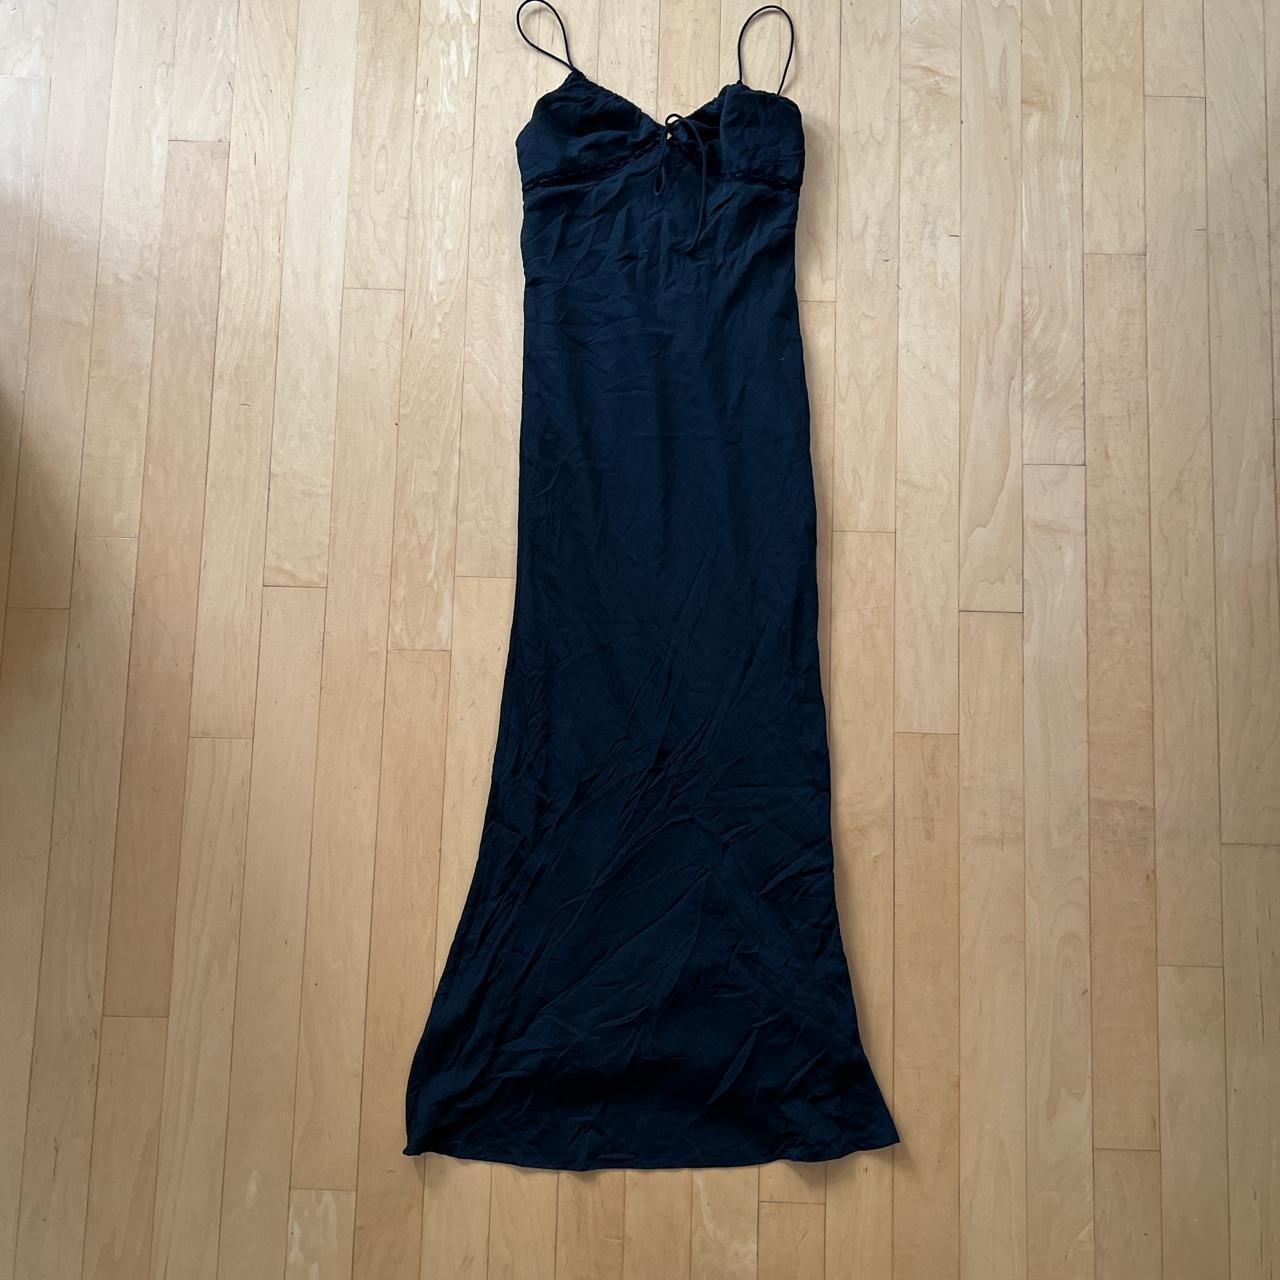 Princess Polly Emily maxi dress with lace... - Depop